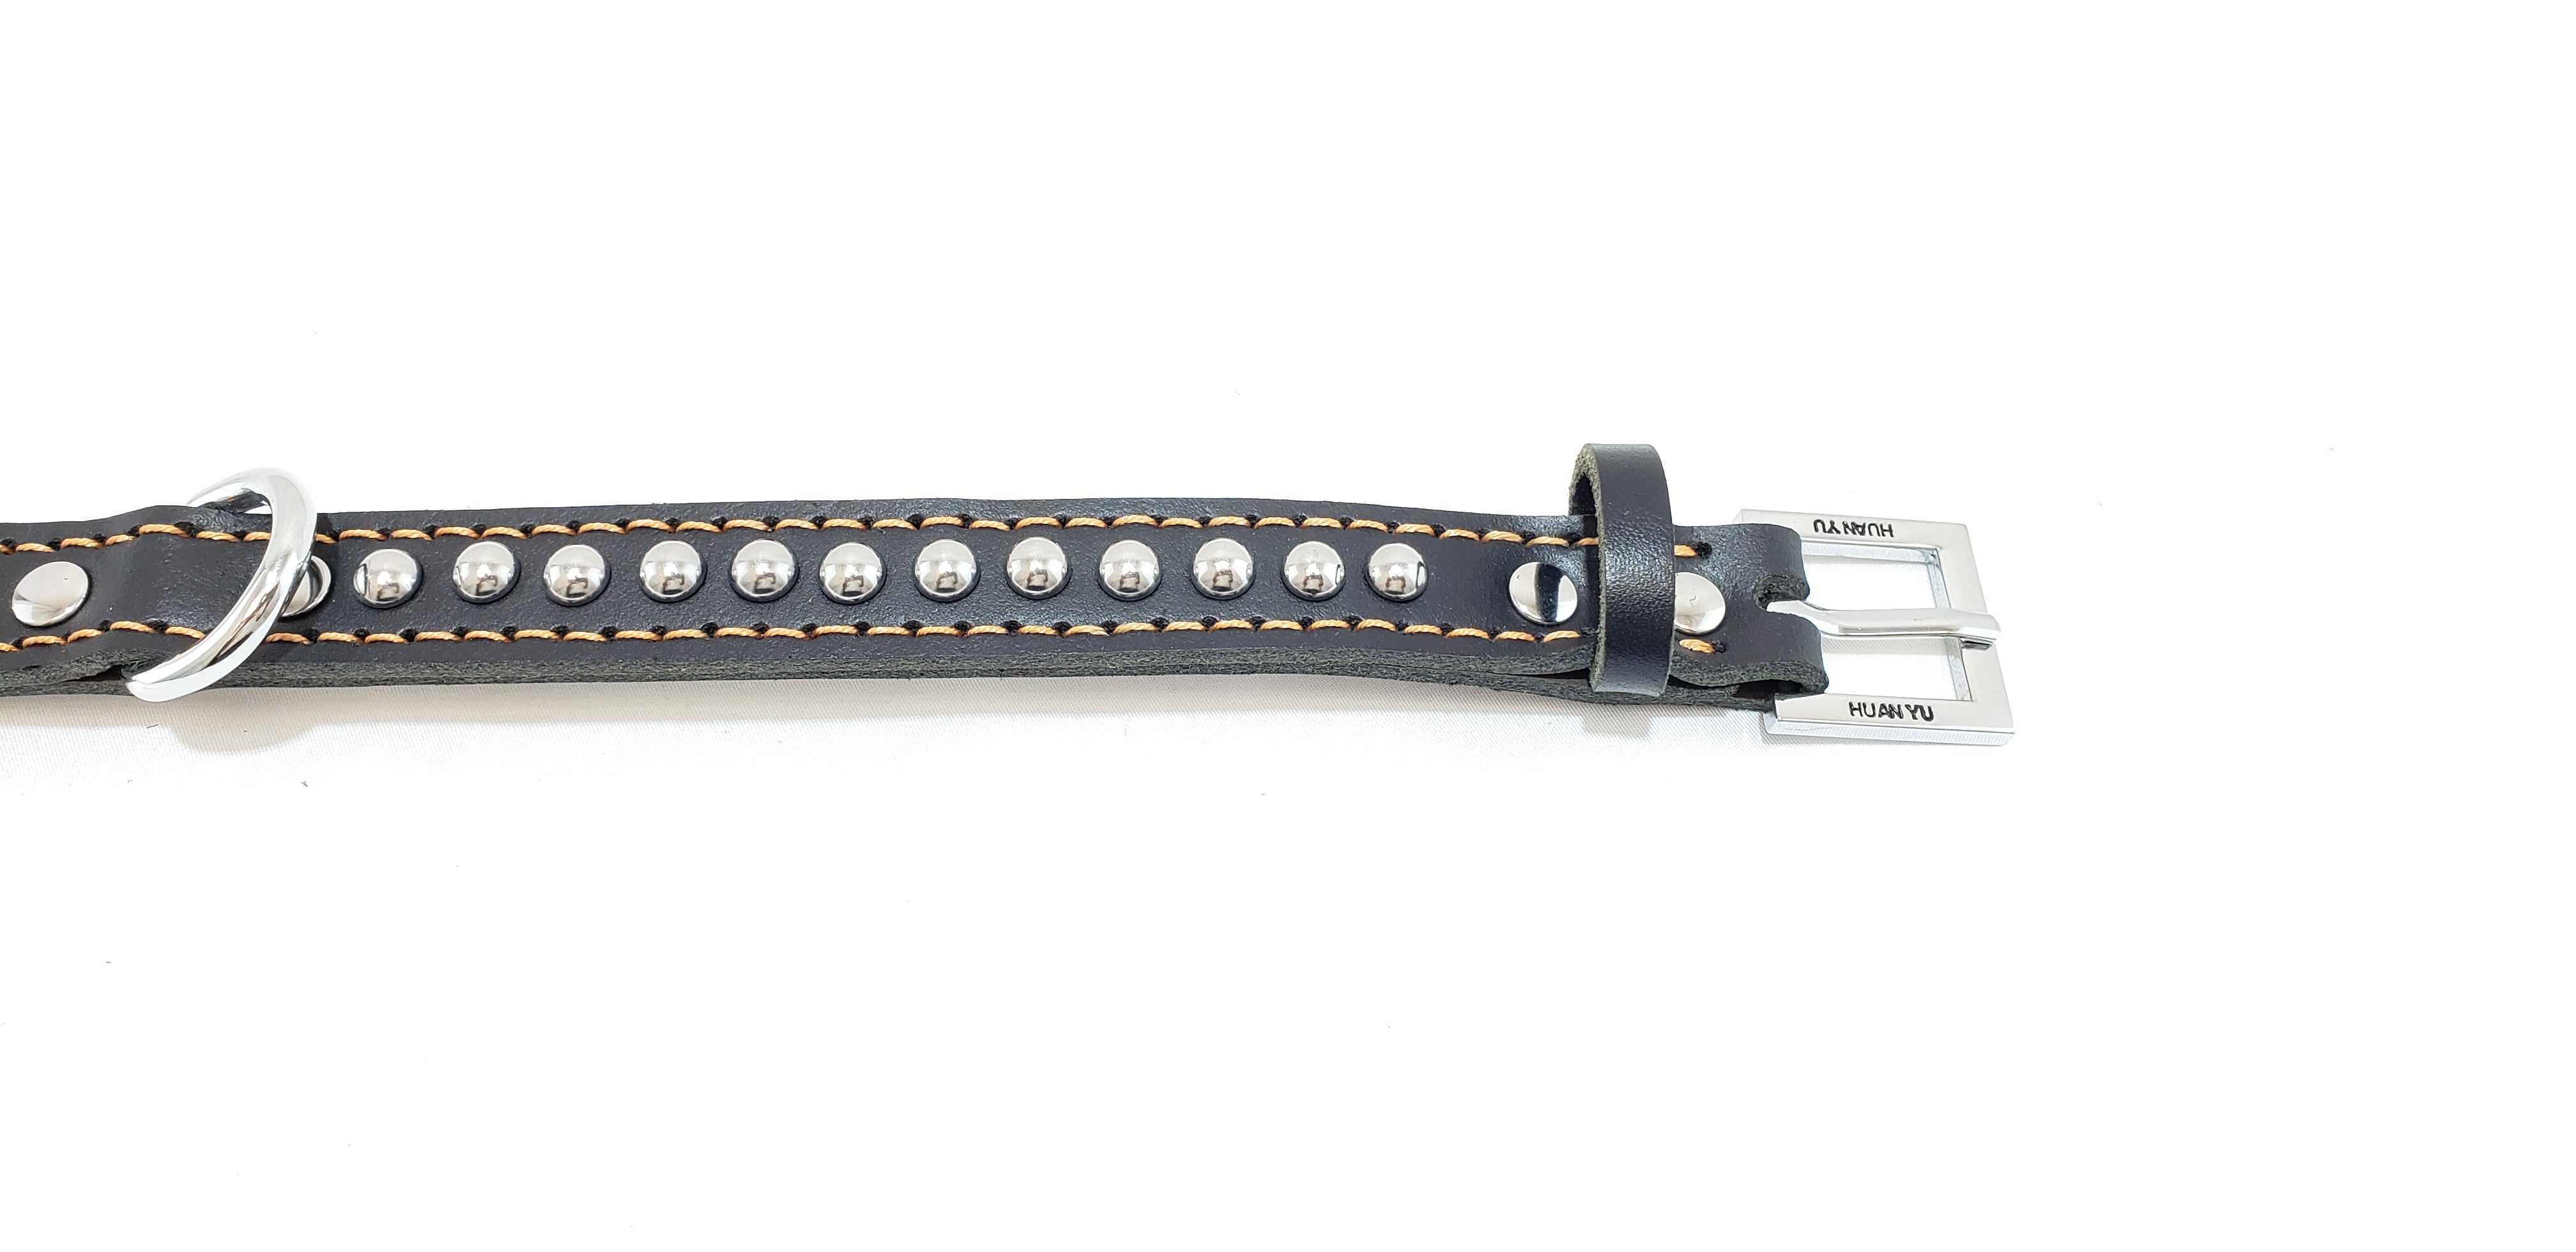 Leather Dog Collar with Single Line of Silver Chrome Buttons